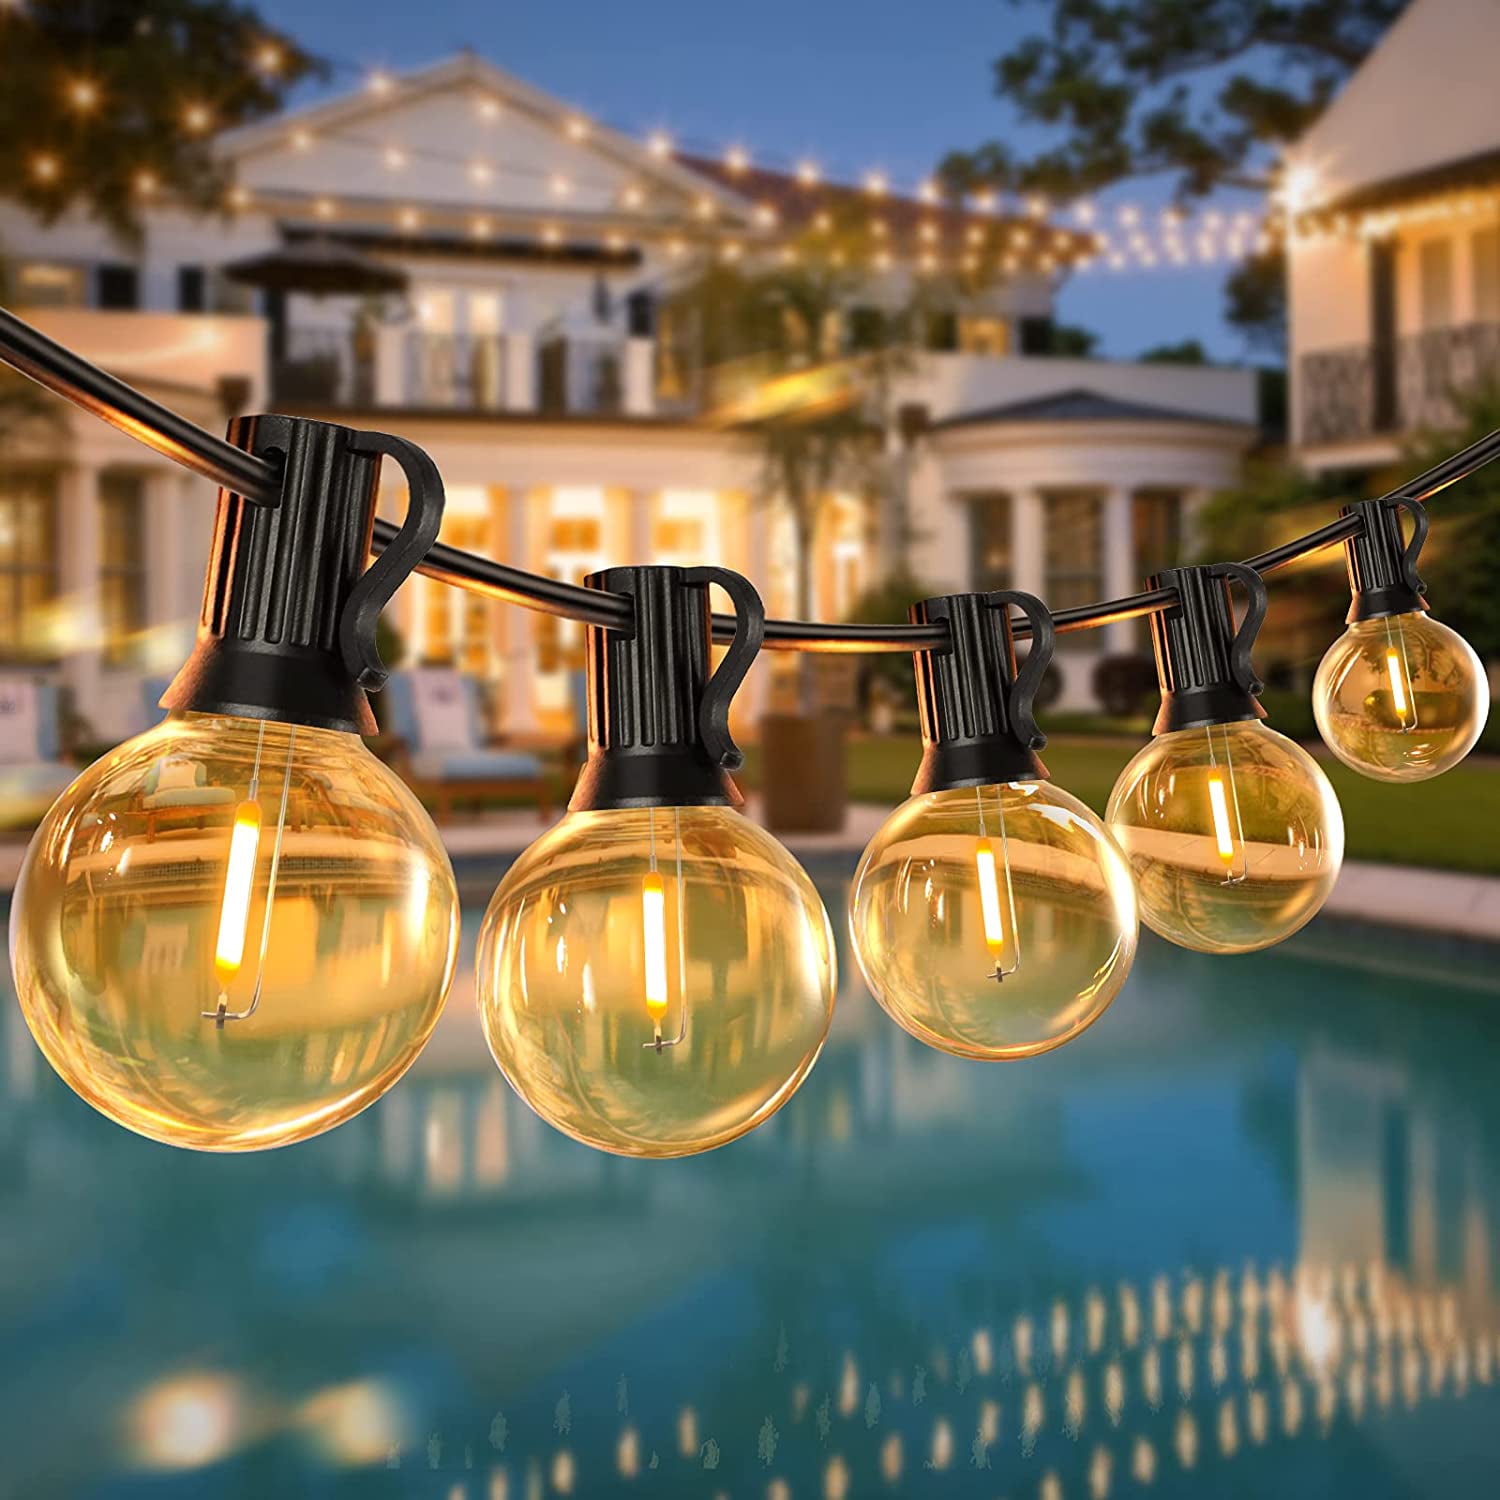 Details about   48ft Outdoor String Lights Waterproof Commercial Patio Globe Fairy Light Bulbs 